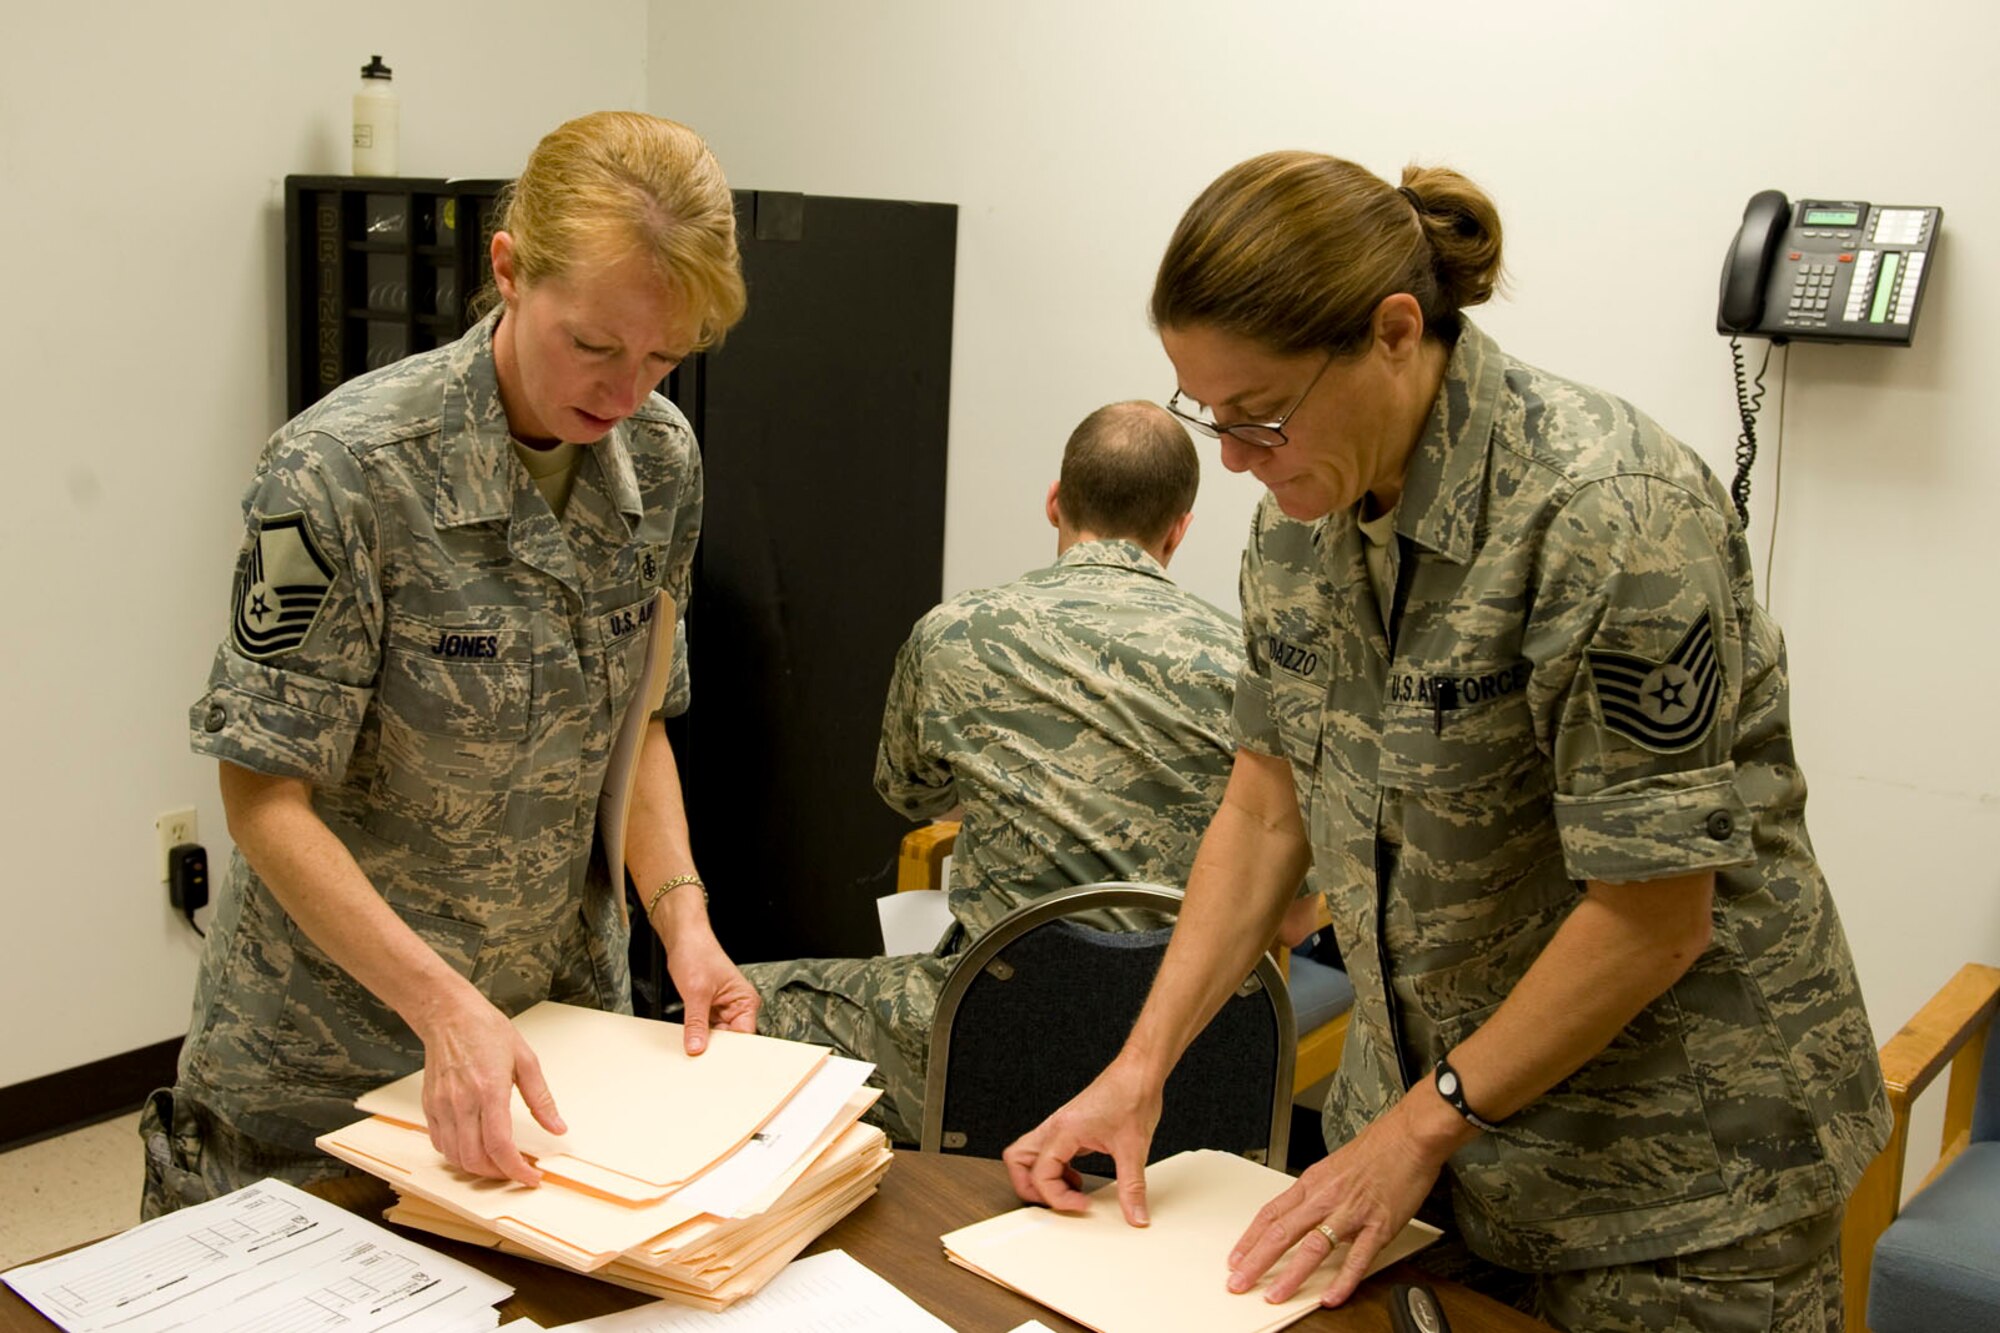 HAYNEVILLE, Ala. - Master Sgt. Pauline Jones, a medical logistics technician, from the 176th Medical Group, Alaska Air National Guard and Tech. Sgt. Jan Randazzo, a medical administration technician, from the 131st Medicial, Missouri Air National Guard prepare patient forms, May 3, 2011.  Jones and Randazzo are in Alabama for an Innovative Readiness Training (IRT) mission. The IRT program allows for real world training opportunities for military personnel while providing needed services to under-served communities in the United States. Alaska Air National Guard photo by Master Sgt. Shannon Oleson.